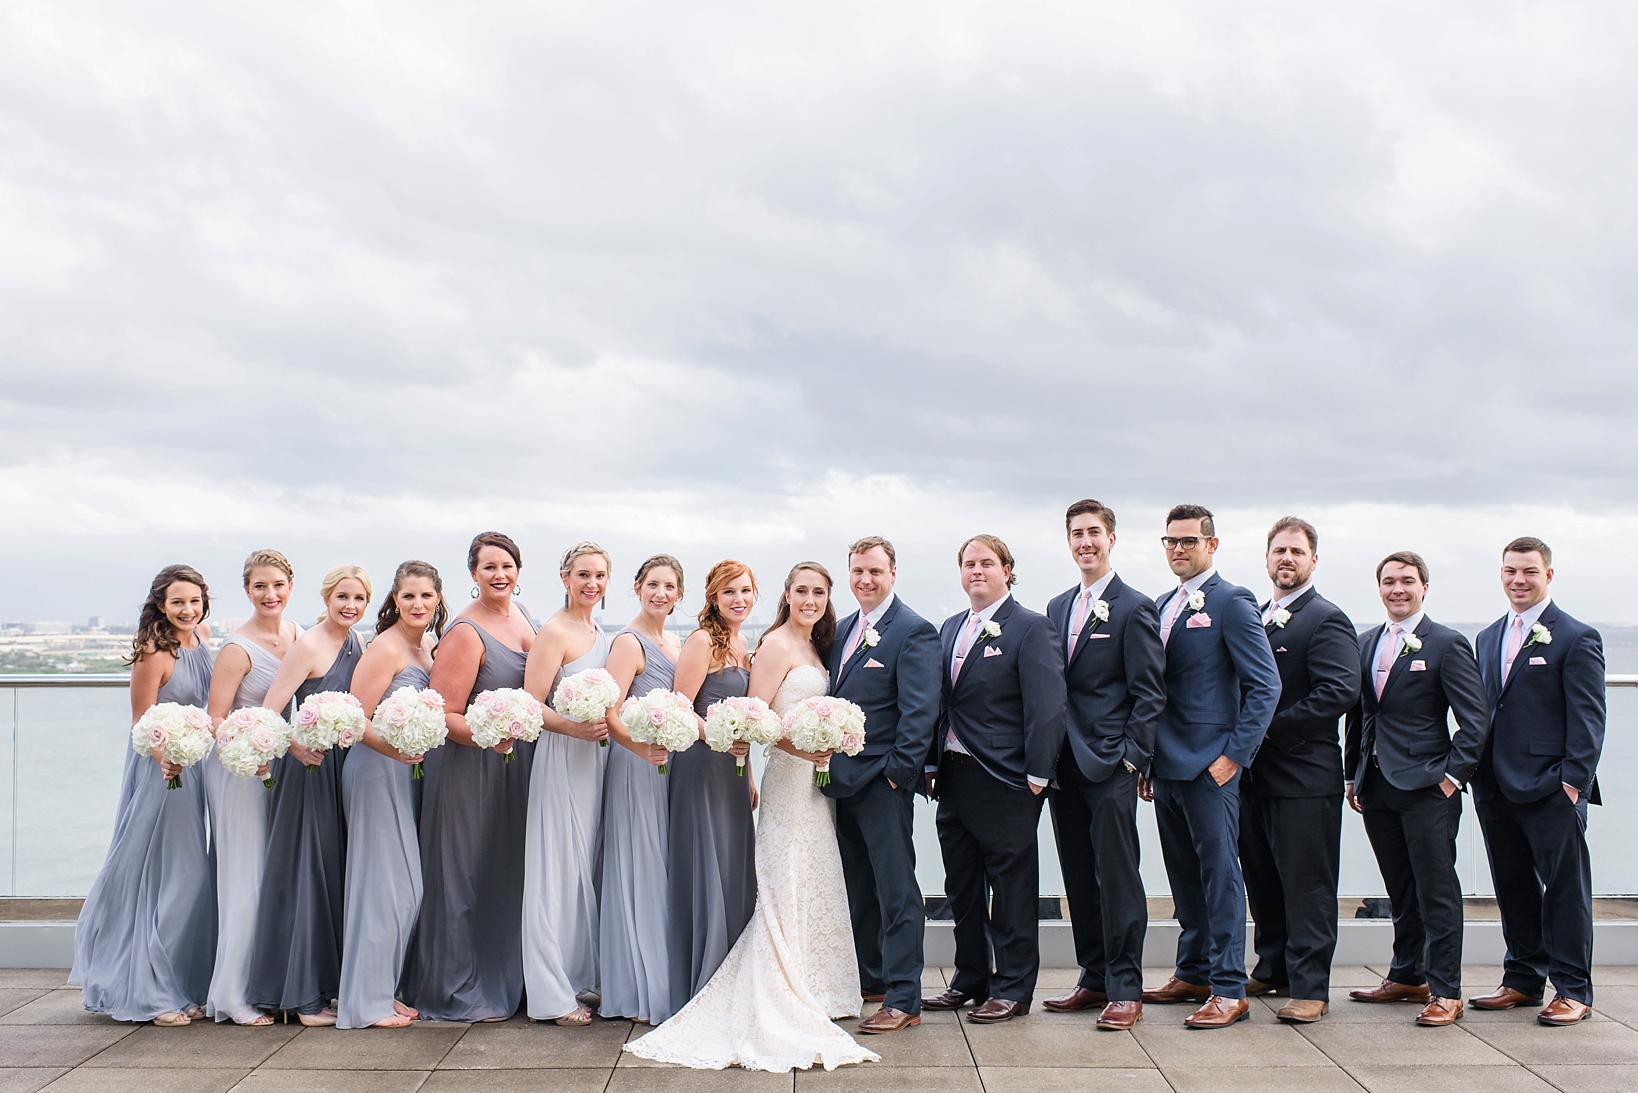 The complete bridal party on the rooftop deck of the Westin Tampa Bay hotel by Sarah & Ben Photography